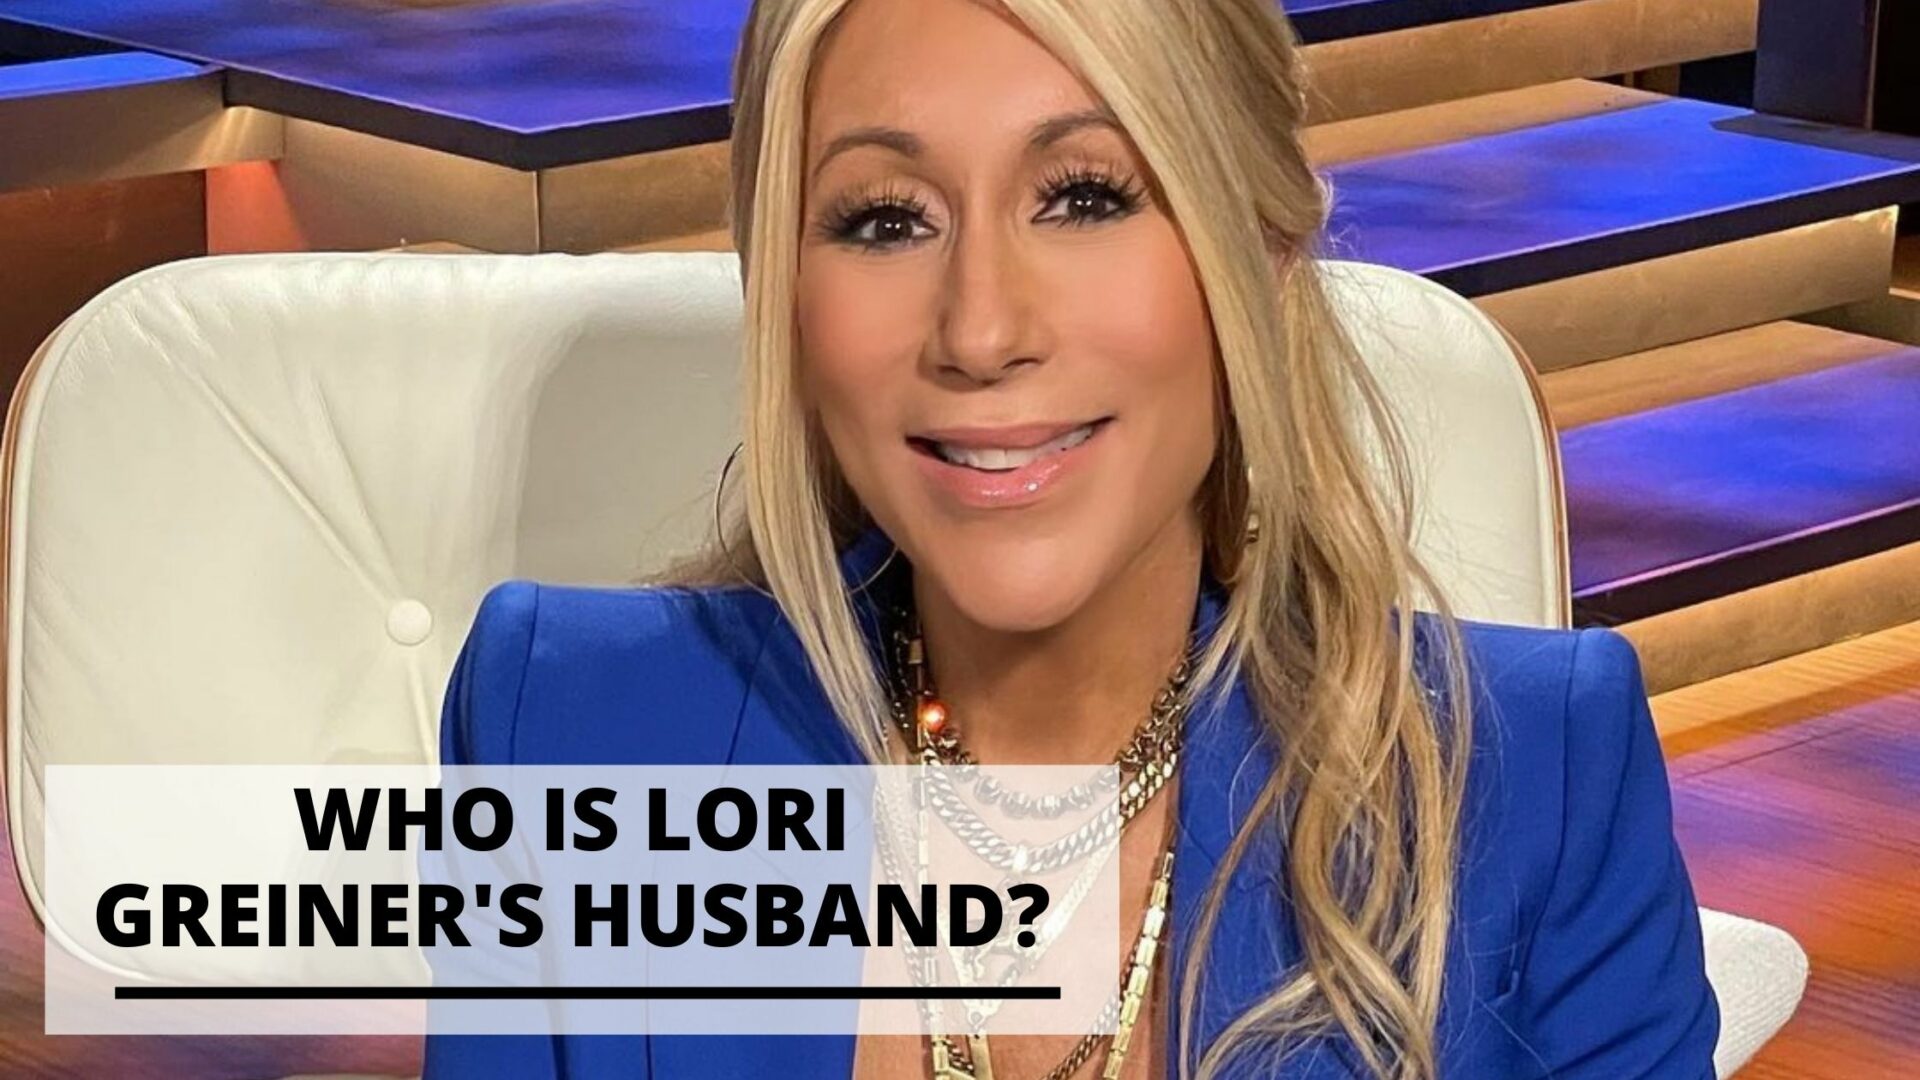 You are currently viewing Info of Dan Greiner and Lori Greiner